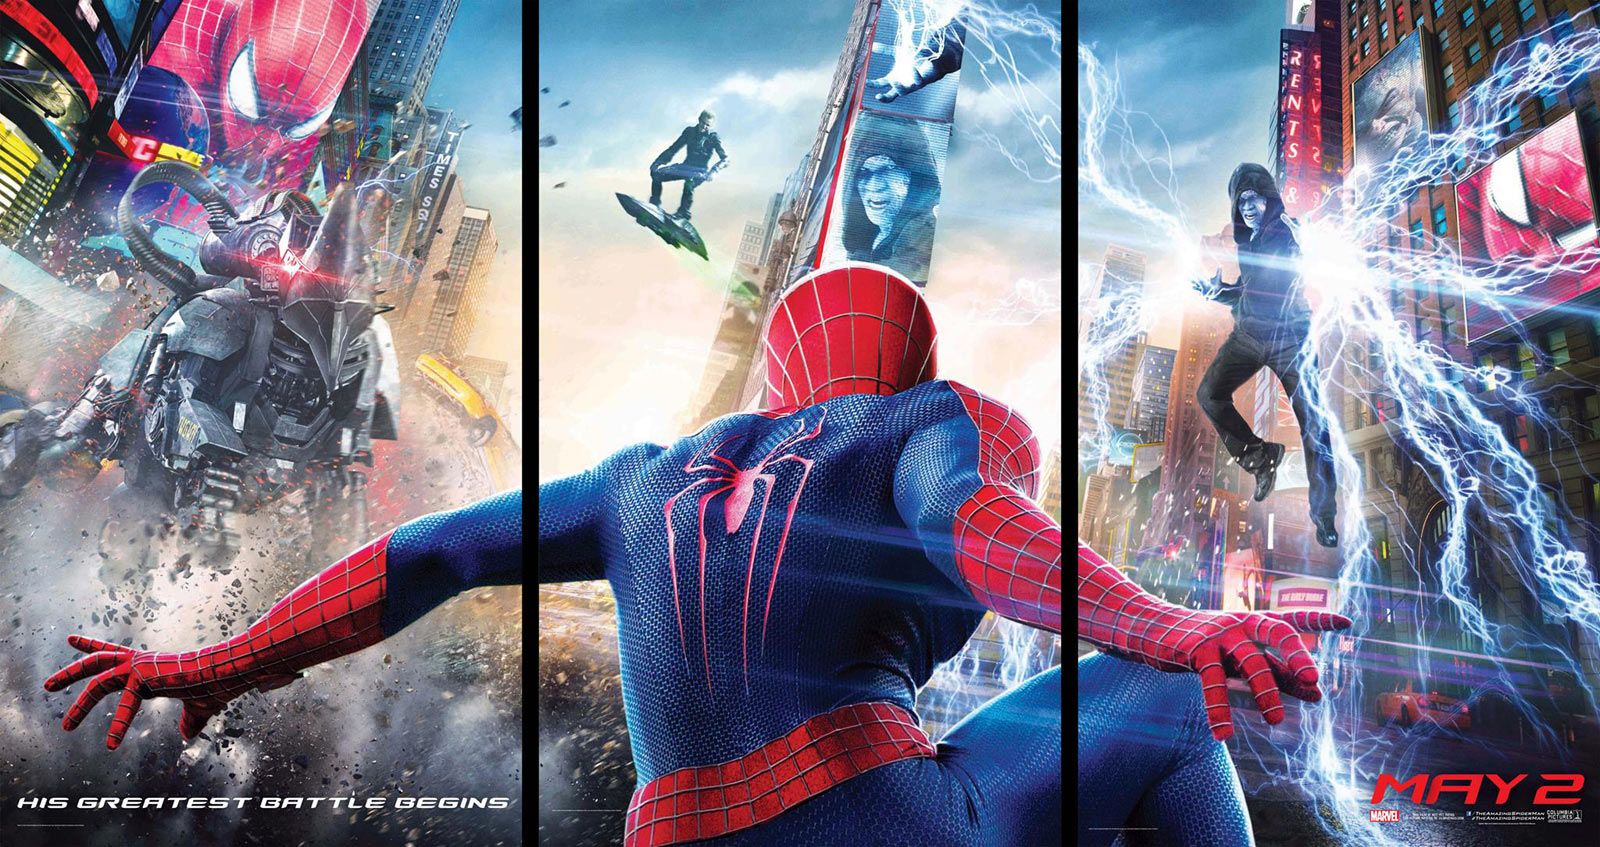 Spider-Man in Times Square fighting villains from The Amazing Spider-Man 2 poster.